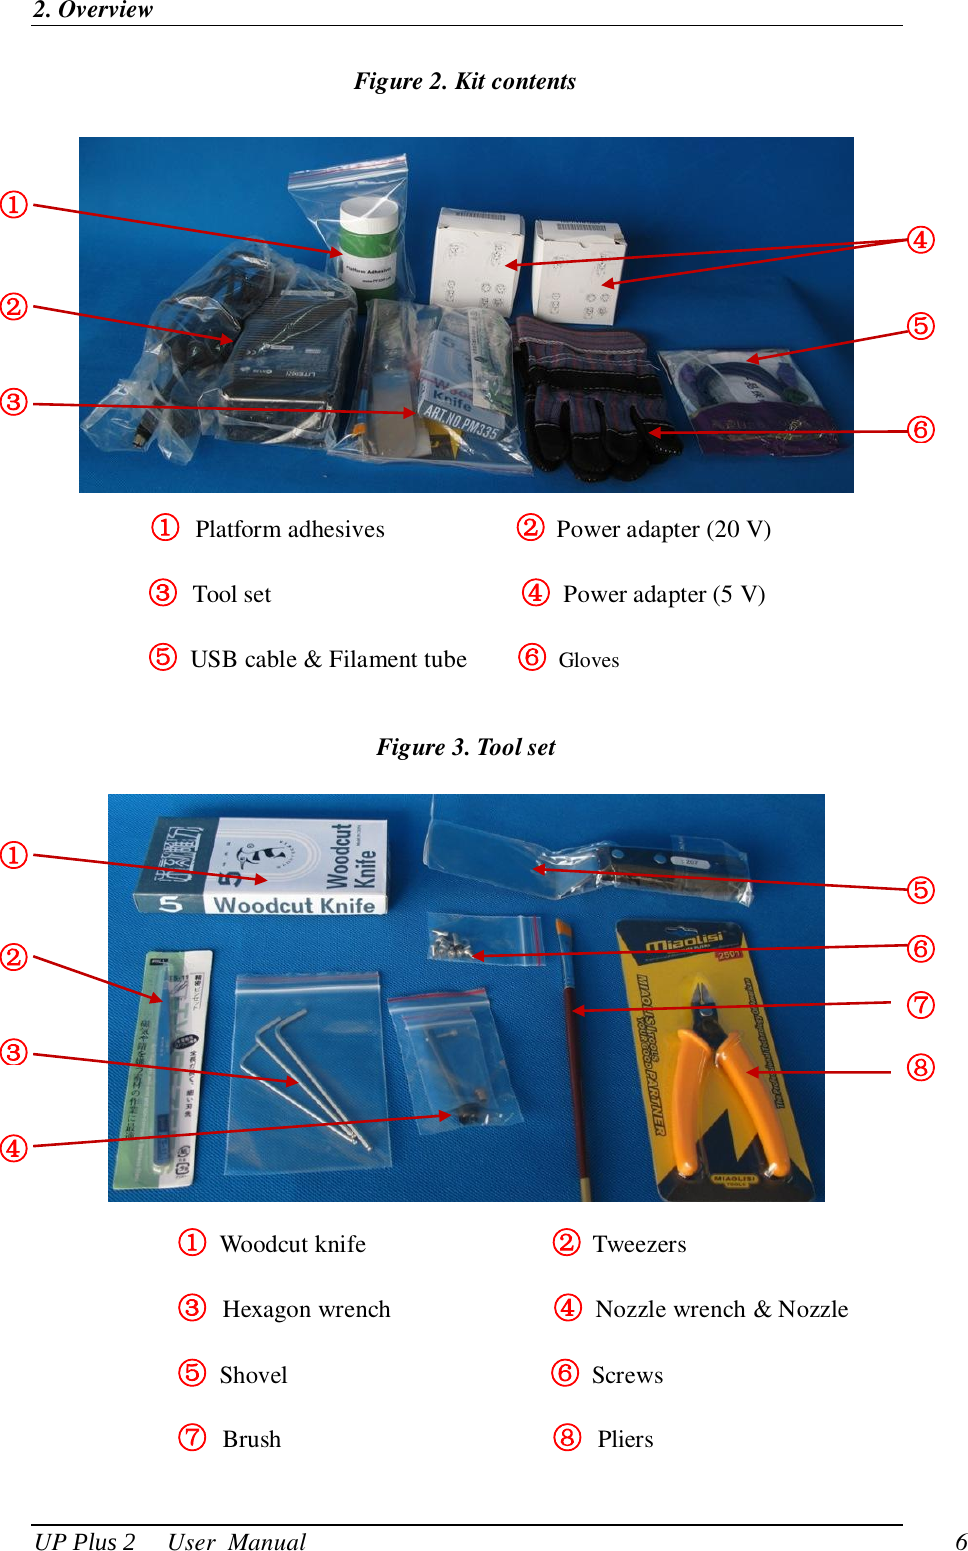 2. Overview UP Plus 2     User  Manual                                6 Figure 2. Kit contents  ① Platform adhesives                        ② Power adapter (20 V) ③ Tool set                     ④  Power adapter (5 V) ⑤  USB cable &amp; Filament tube        ⑥ Gloves  Figure 3. Tool set   ①  Woodcut knife                                  ② Tweezers ③ Hexagon wrench                     ④  Nozzle wrench &amp; Nozzle ⑤  Shovel                                      ⑥ Screws ⑦ Brush                      ⑧ Pliers ① ② ③ ④ ⑤ ⑥ ① ② ③ ④ ⑤ ⑥ ⑦ ⑧ 